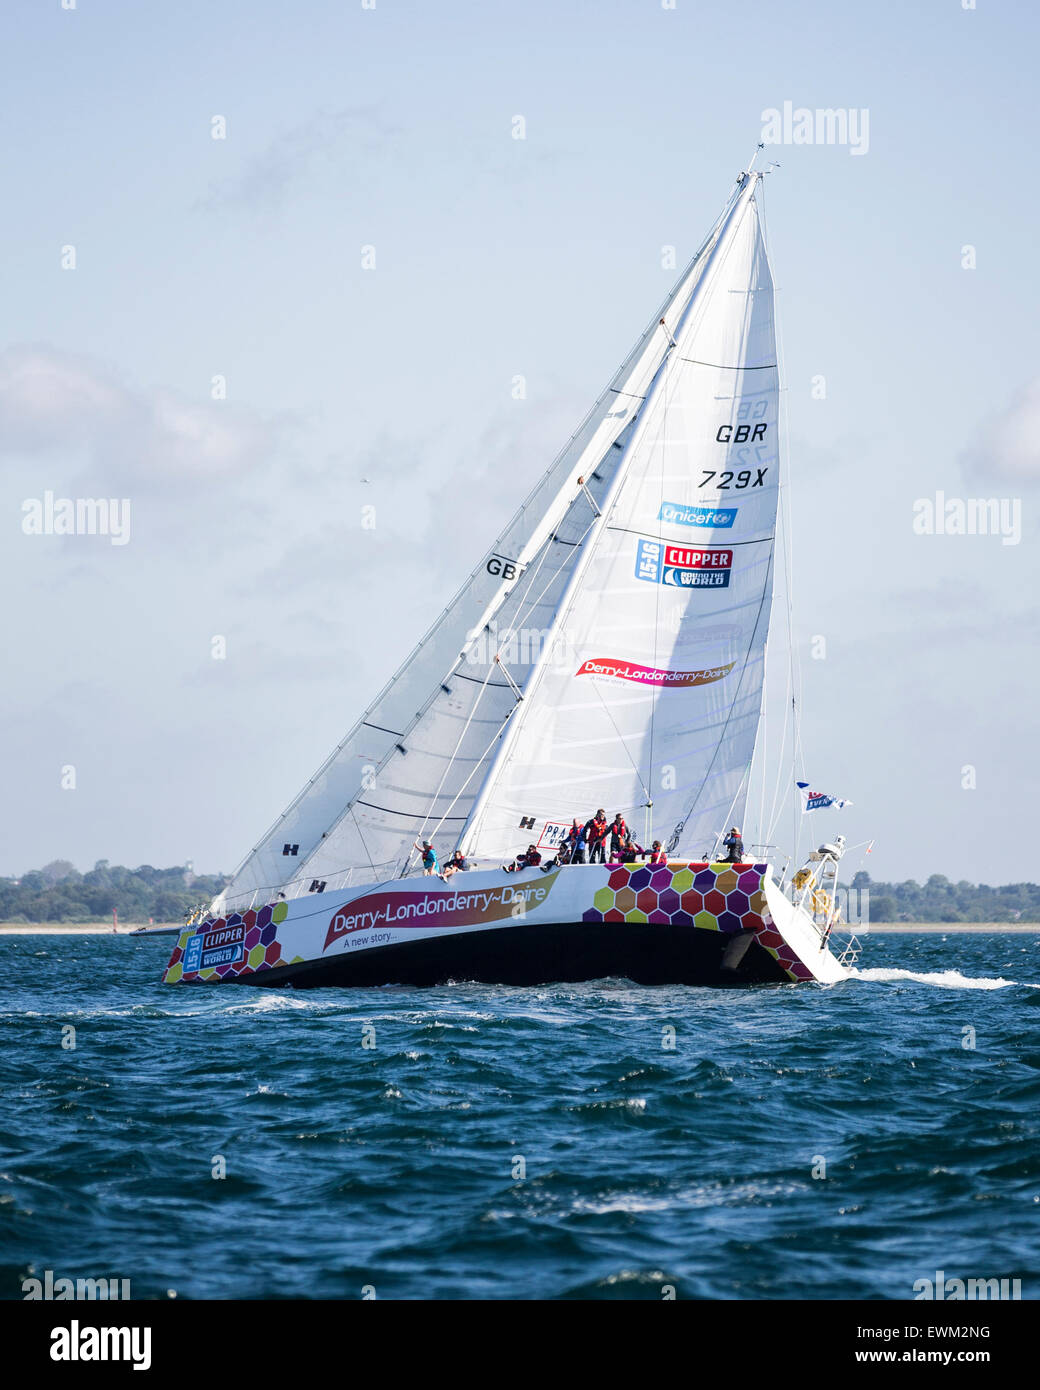 UK. 27th June, 2015. GBR 729X, a former Round the World Race participant, in the 2015 Round the Island Race Credit:  Niall Ferguson/Alamy Live News Stock Photo